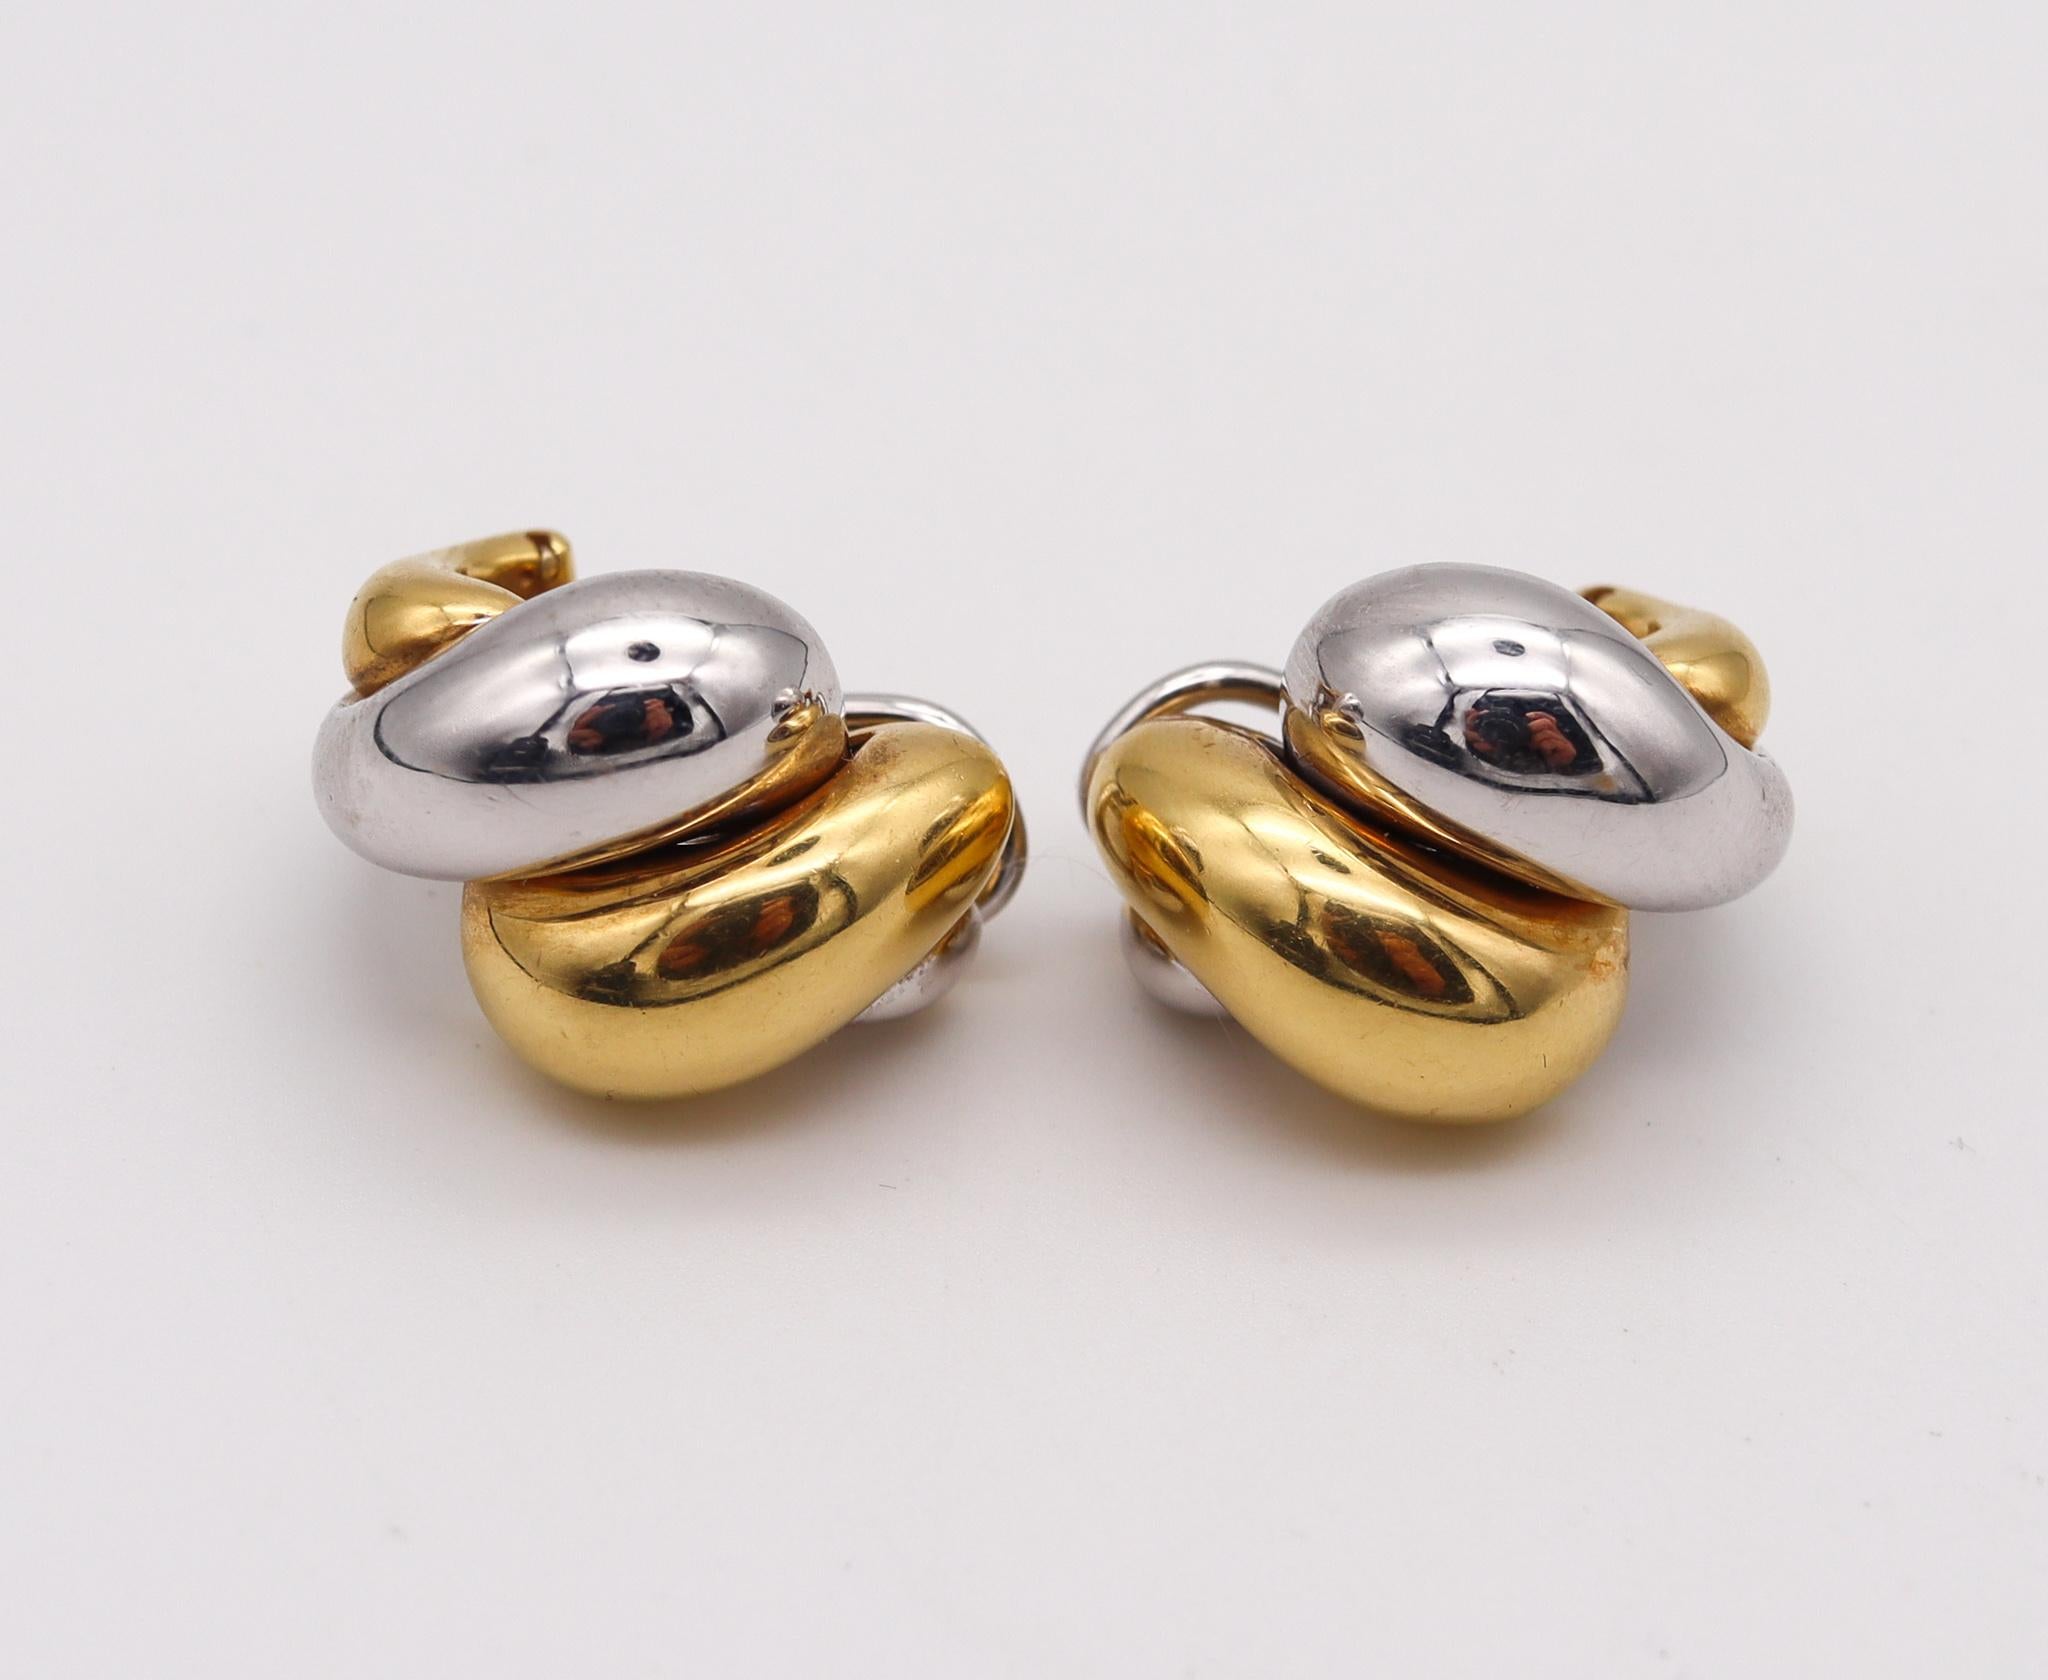 Bicolor clips on earrings made in Italy.

Beautiful and elegant pair of clips-on earrings, created in Vicenza Italy. These substantial bold earrings has been crafted with San Marcos patterns in solid yellow and white gold of 18 karats. Fitted with